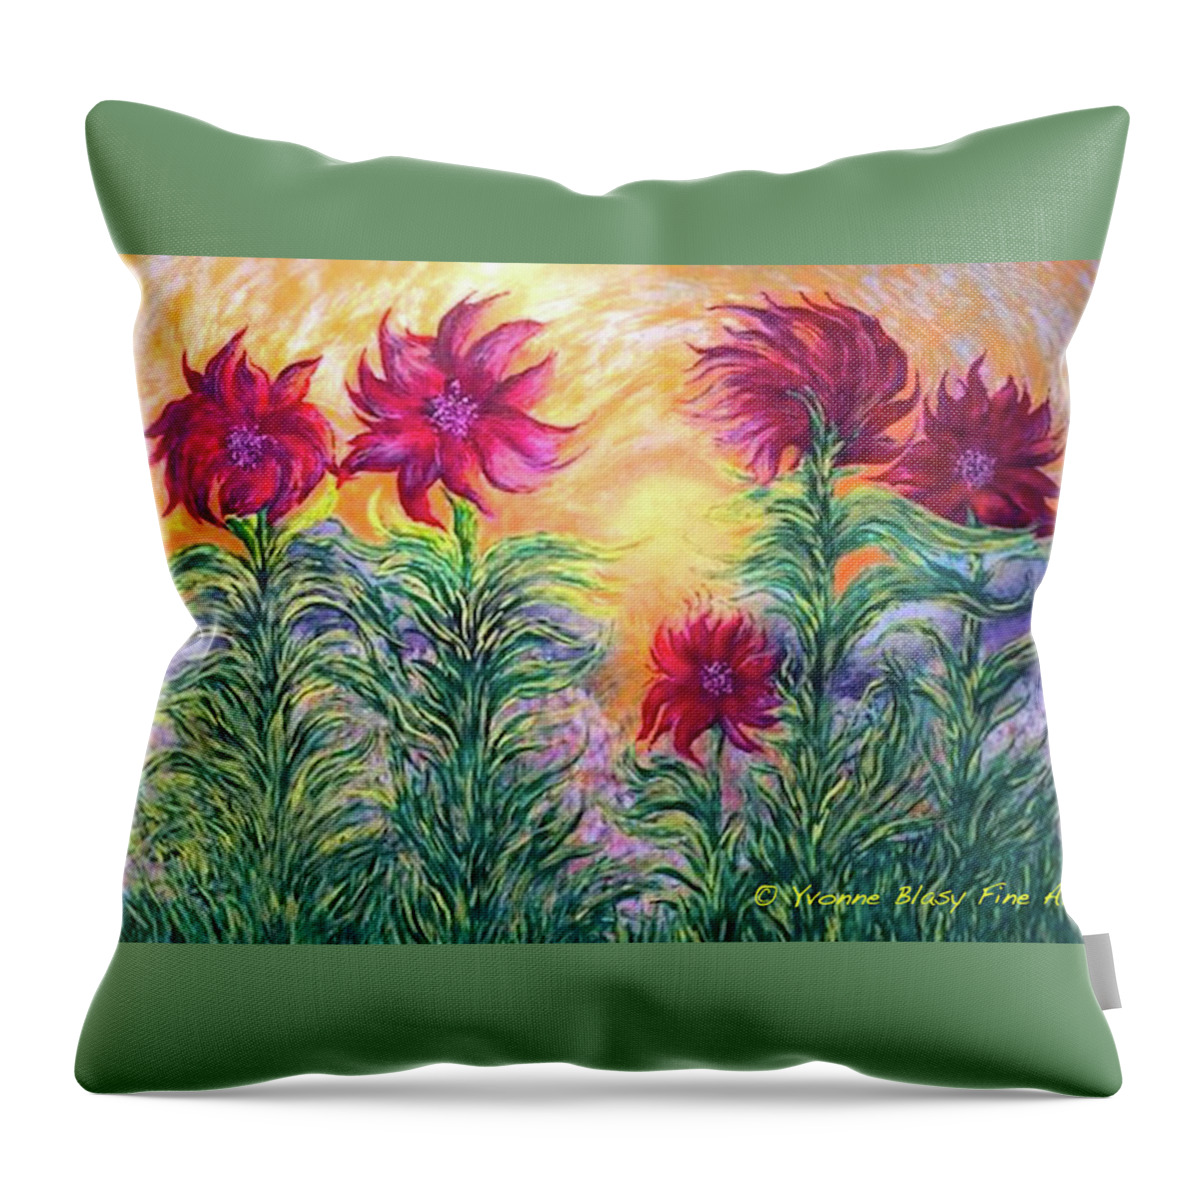 Floral Throw Pillow featuring the painting Family Of Flowers by Yvonne Blasy